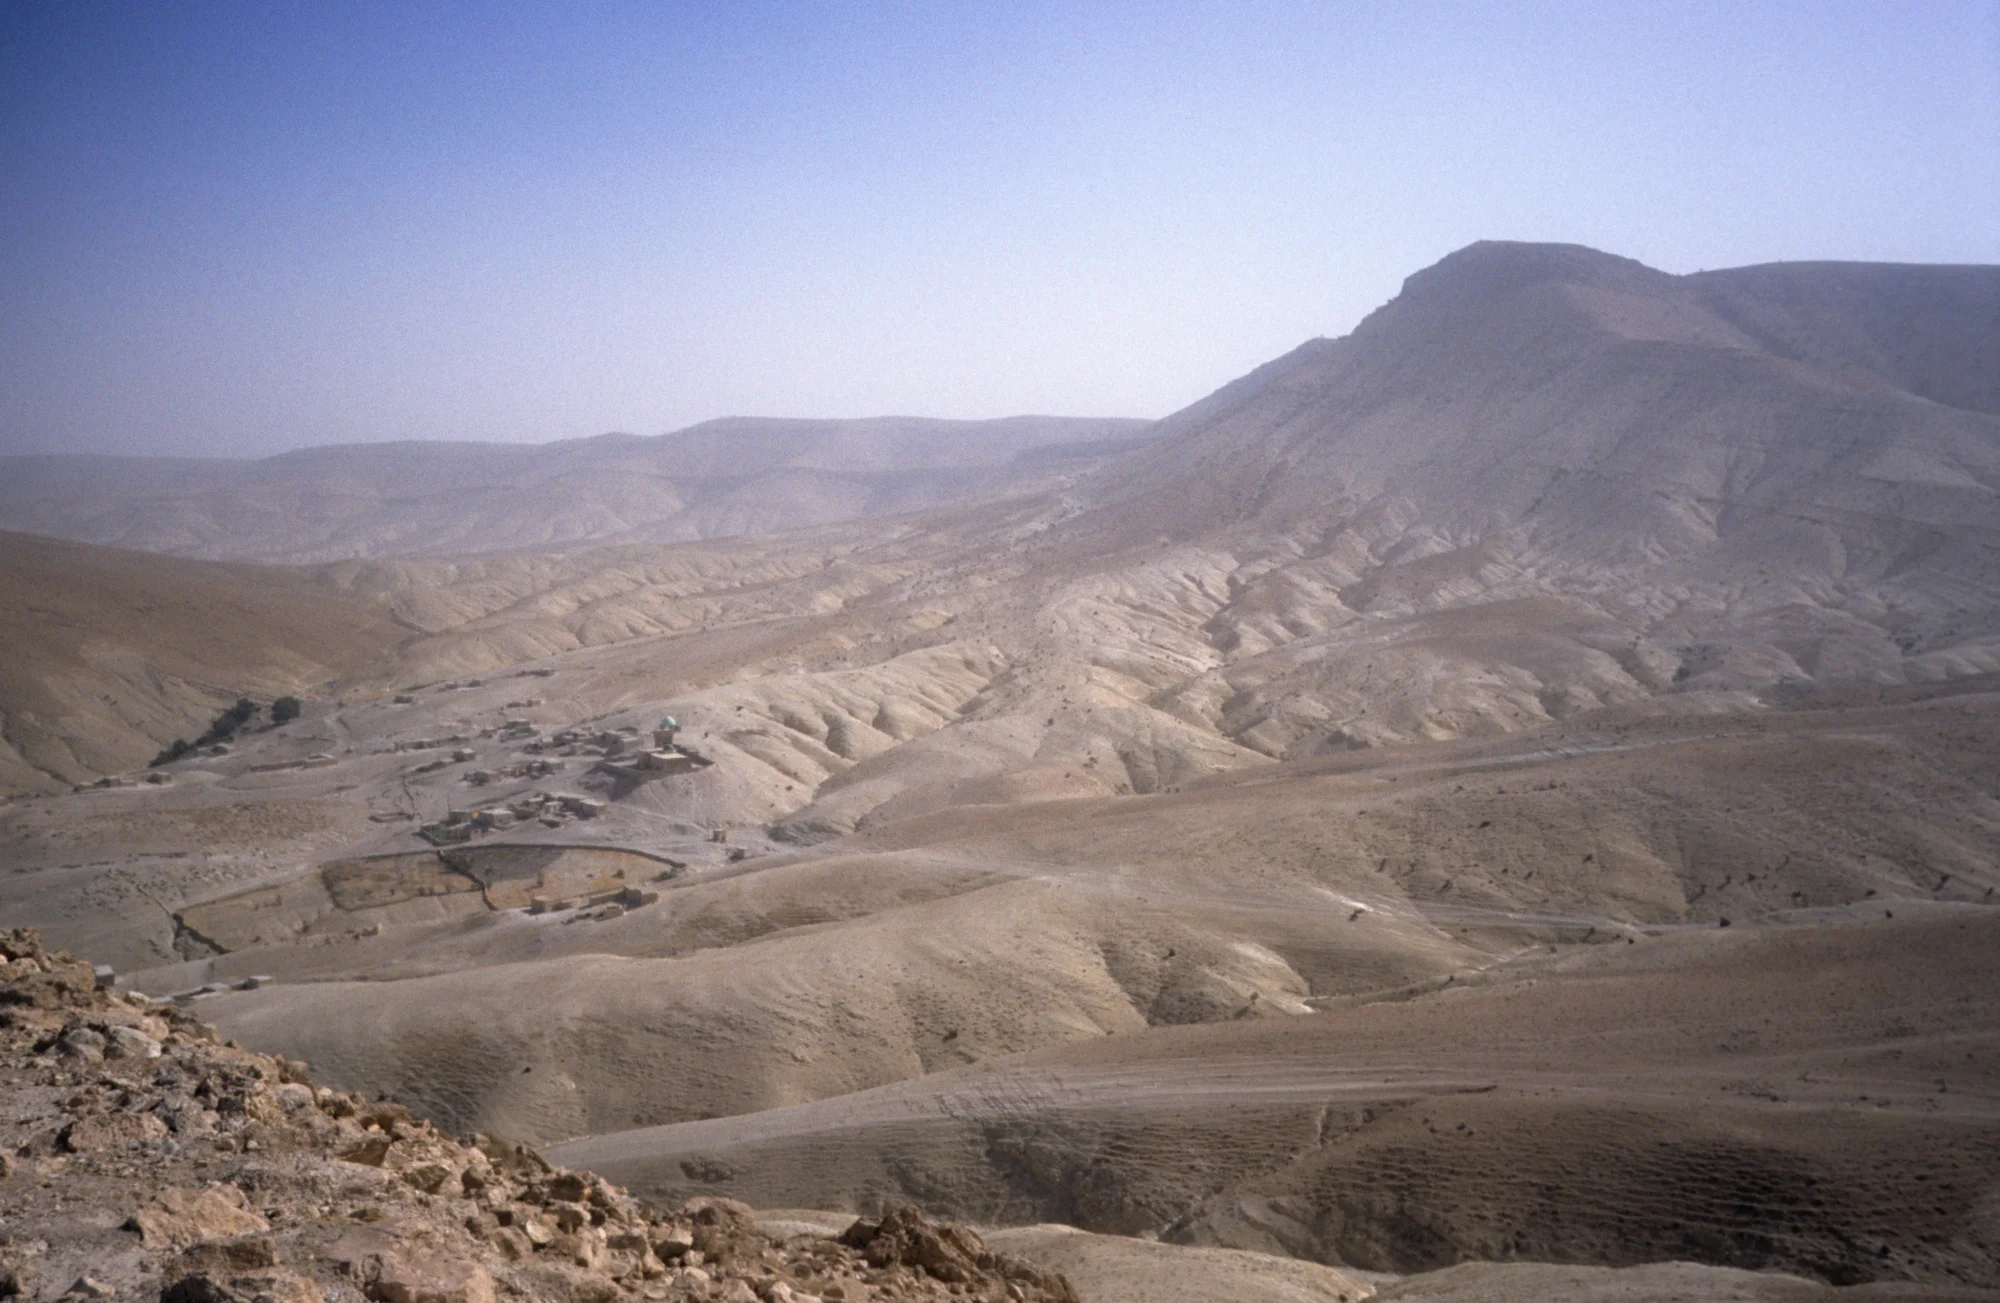 A general view of ʿAbd al-ʿAziz Mountains, showing the village of Al-Ghara, which contains the shrine of ʿAbd al-ʿAziz